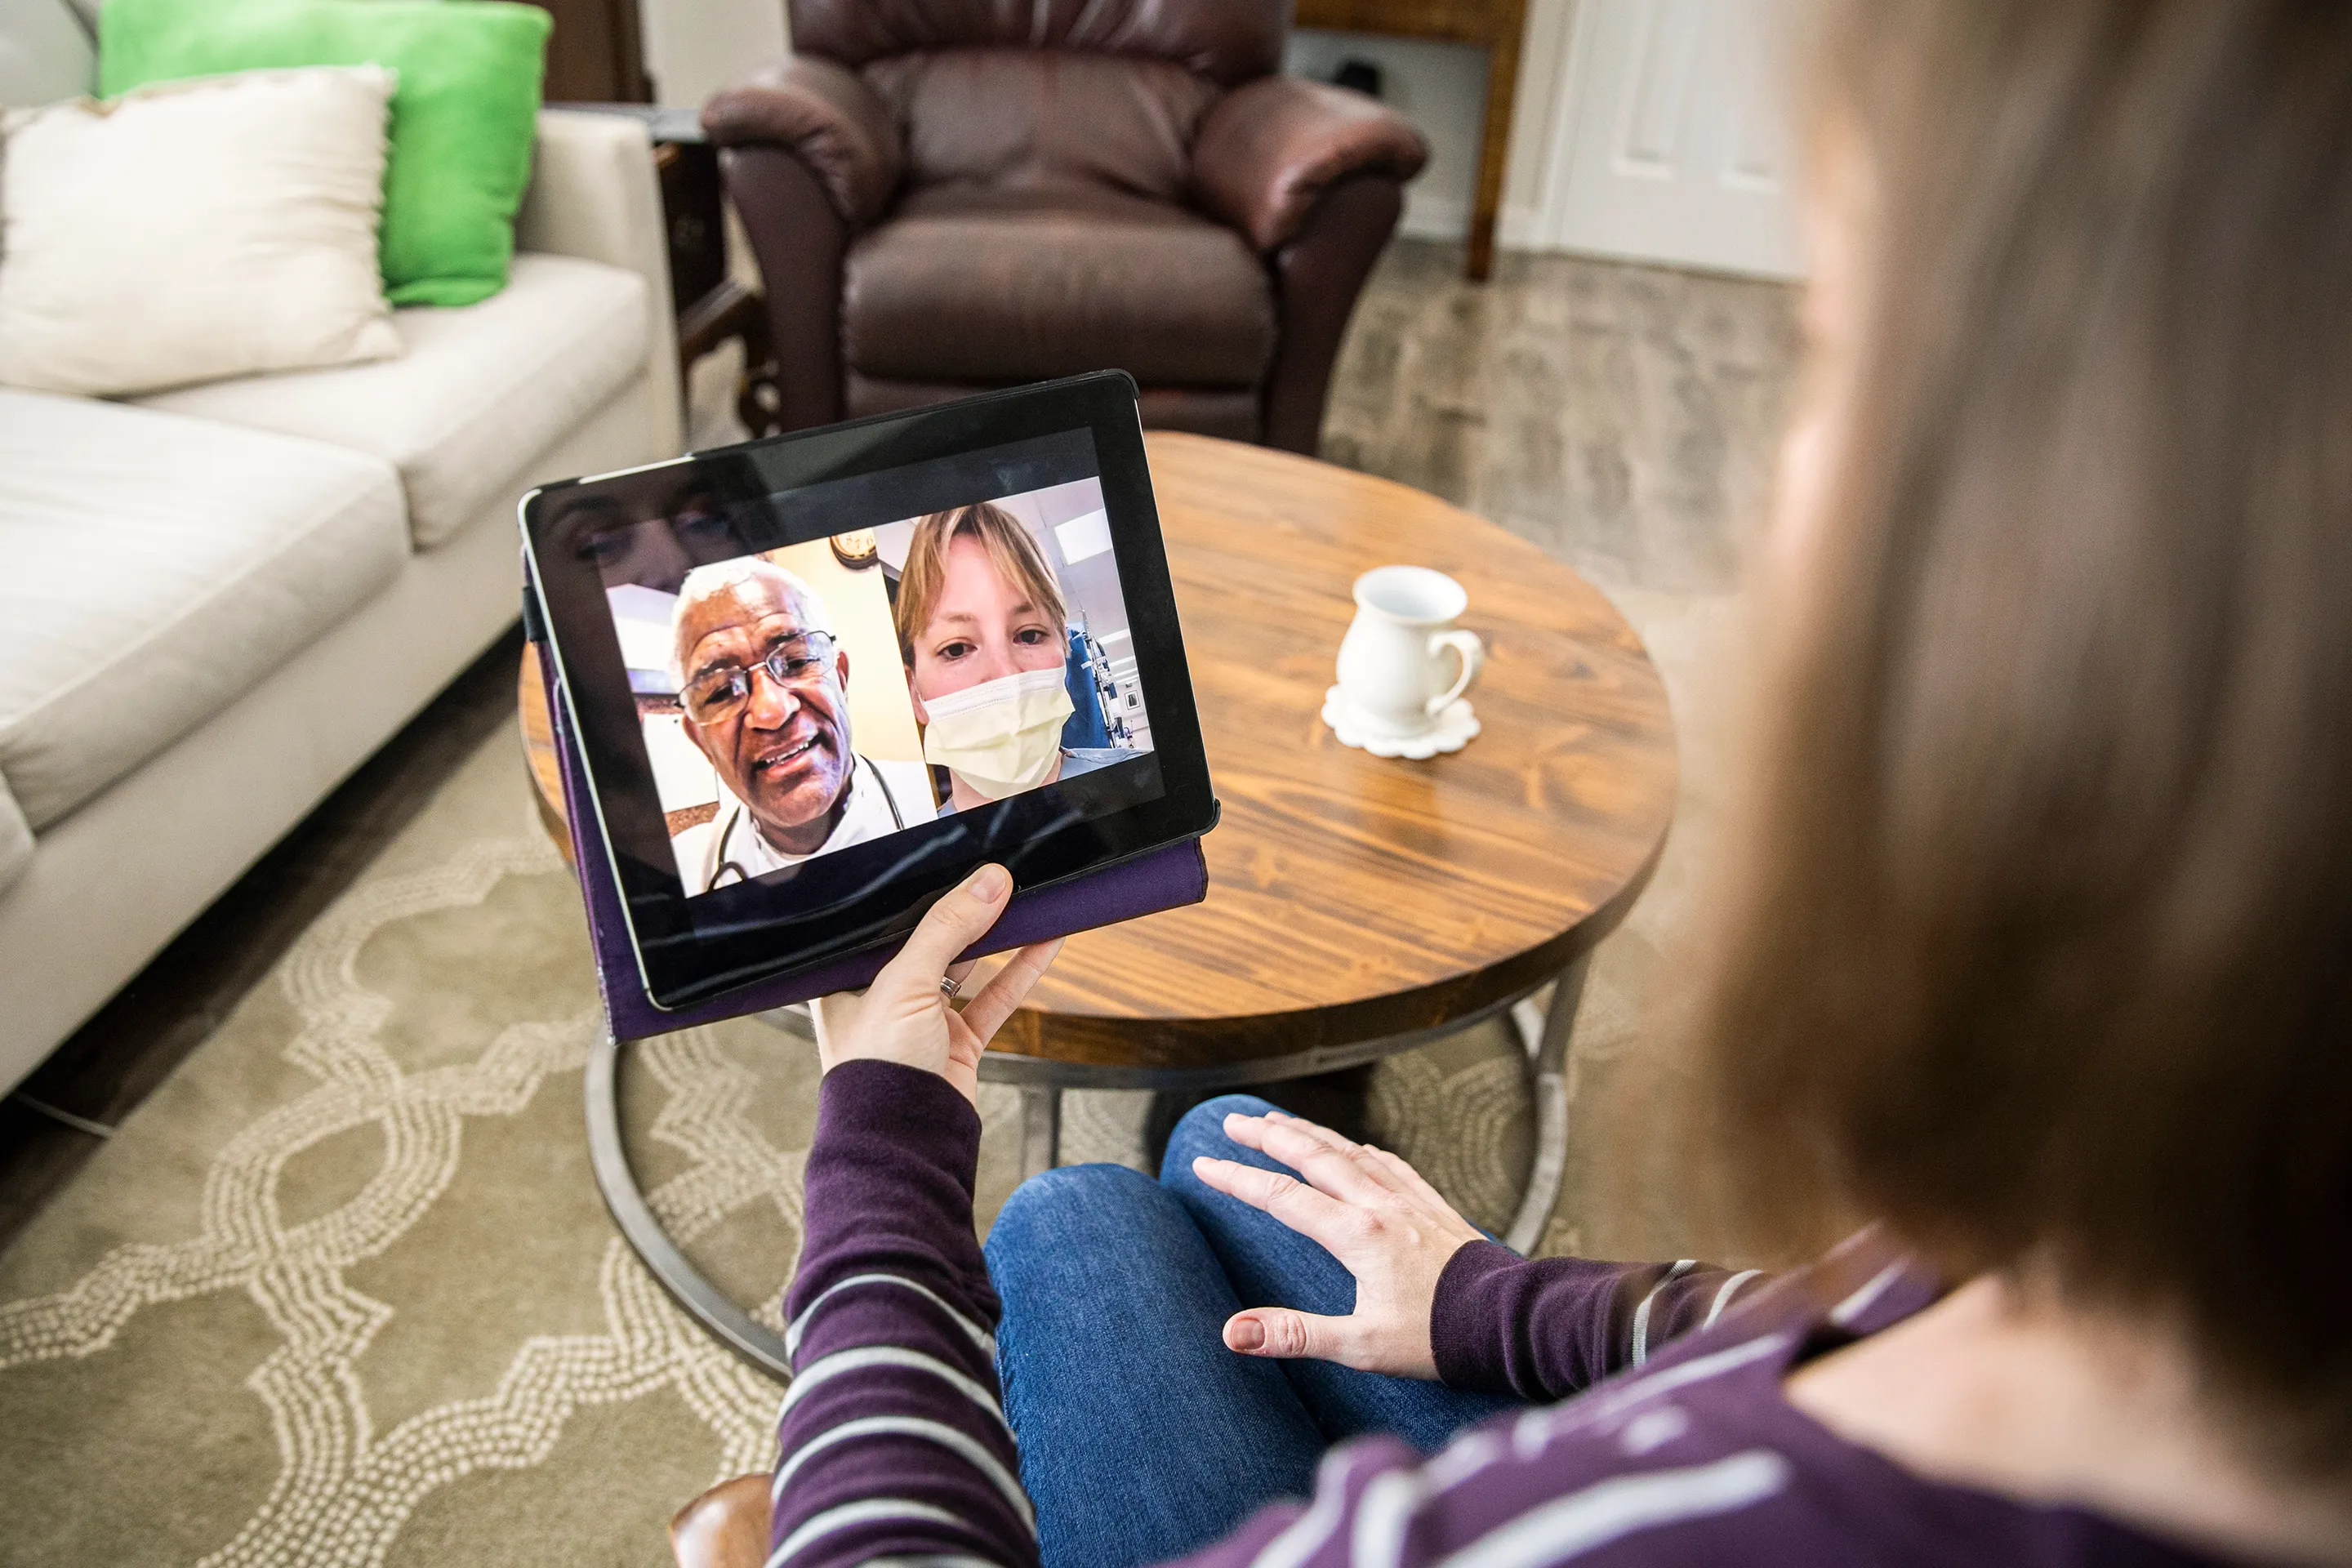 Doctors and Patients Are Embracing Telehealth. But Will Insurers Continue to Pay for Virtual Visits Post-Pandemic?